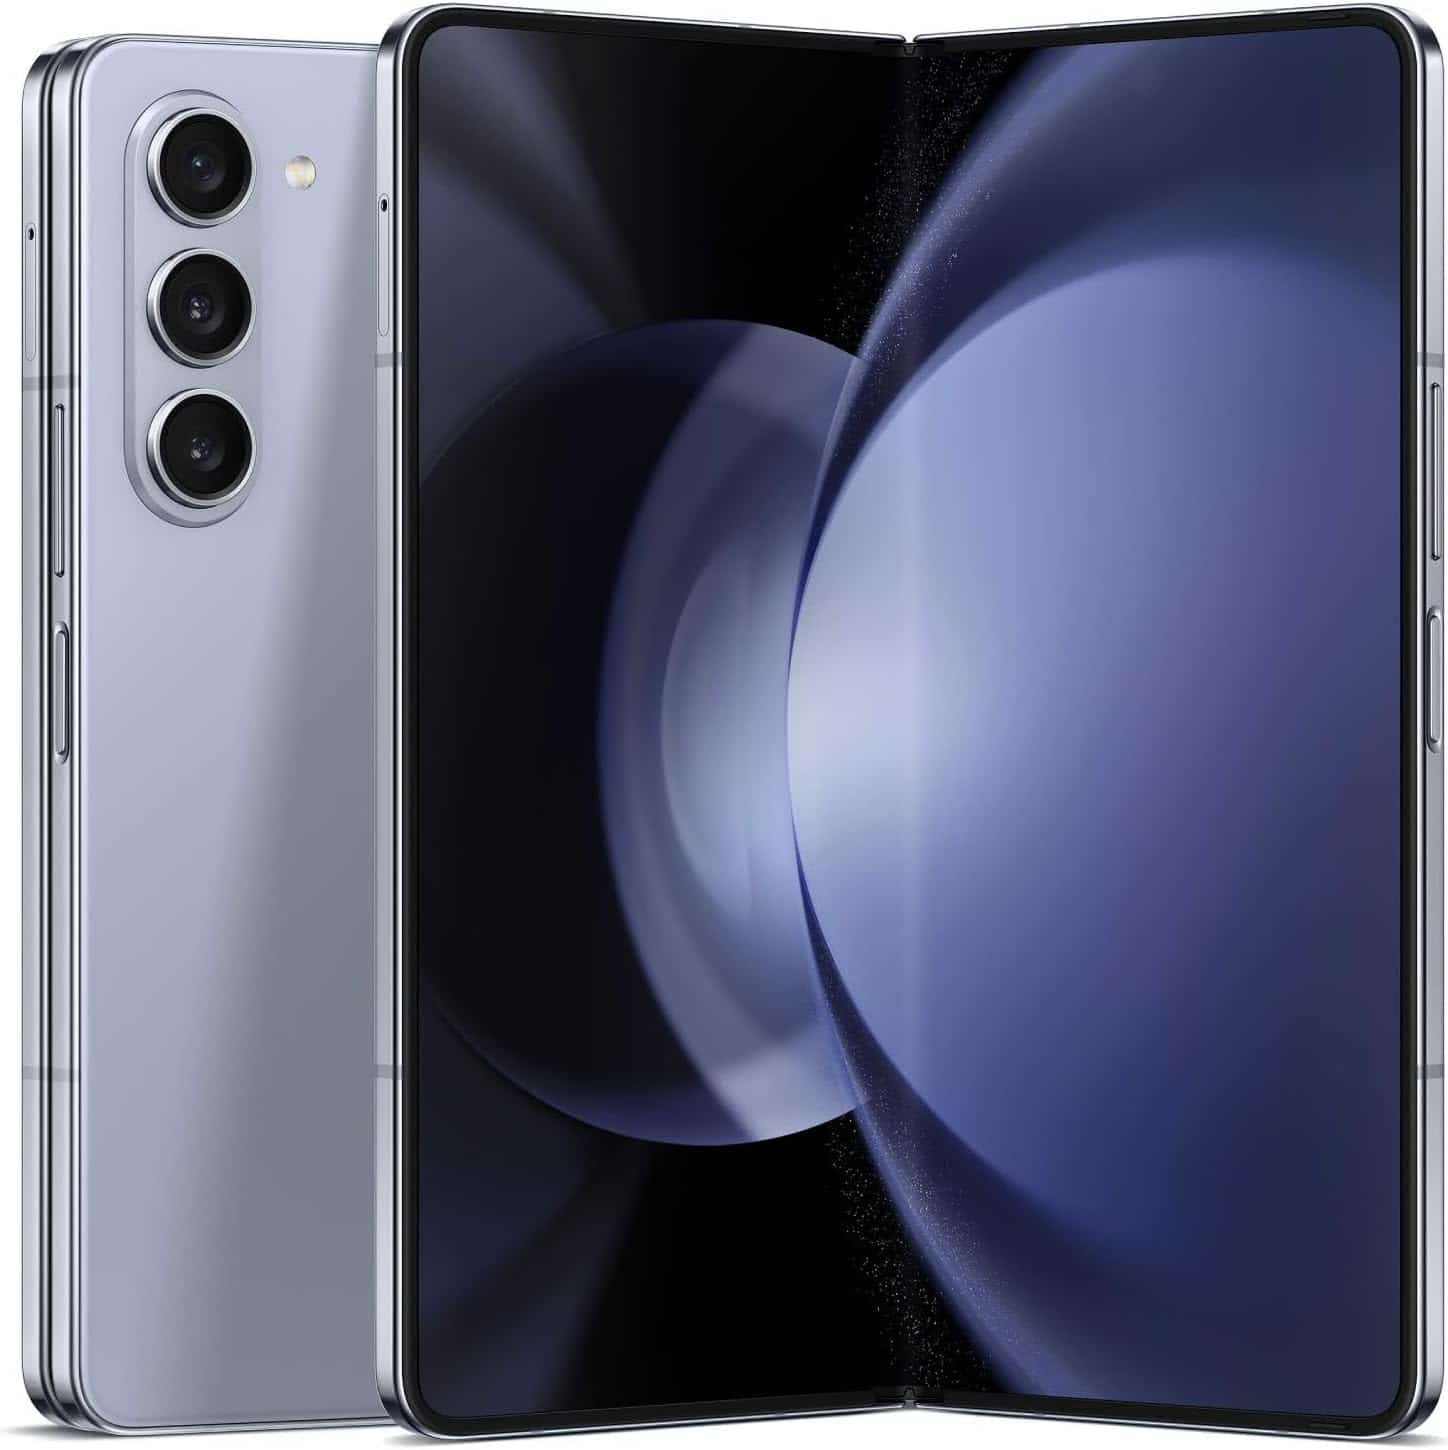 The SAMSUNG Galaxy S10e is shown on a white background.